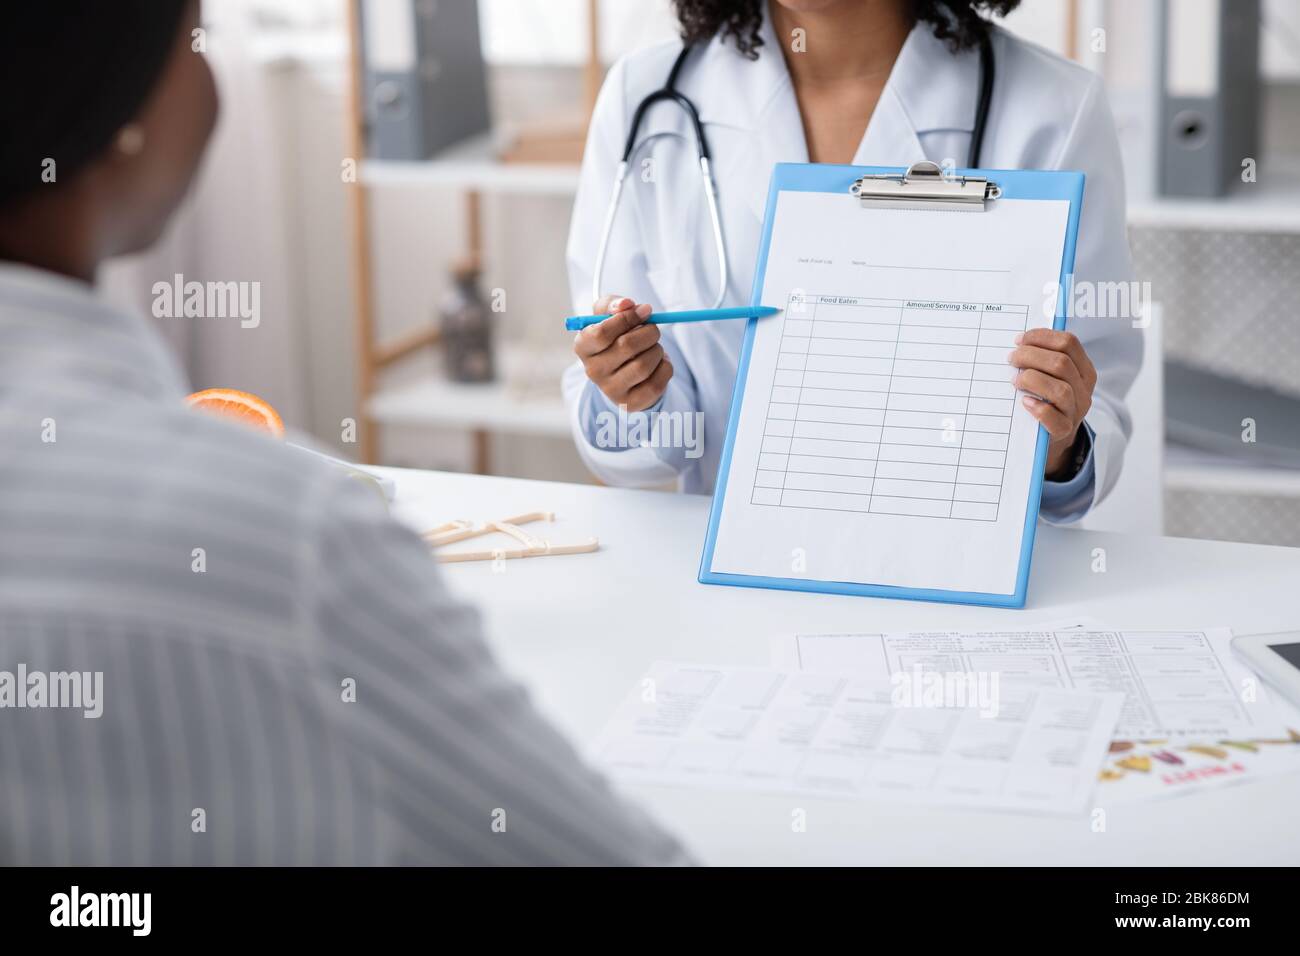 Dietician showing female patient treatment plan, cropped Stock Photo